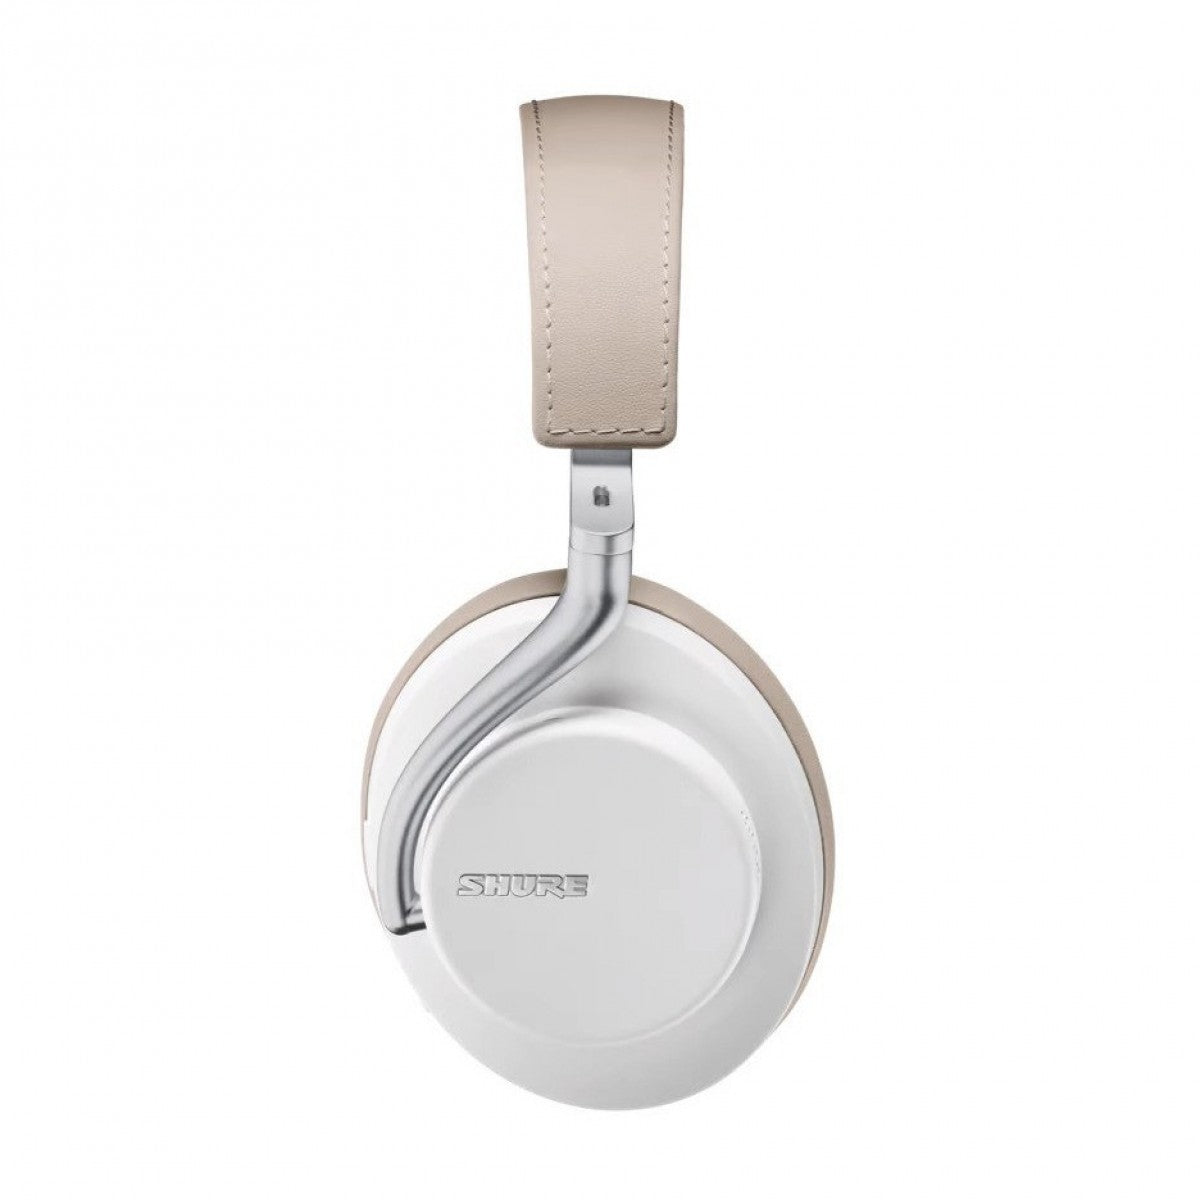 Shure AONIC 50 Wireless Noise Cancelling Headphones White